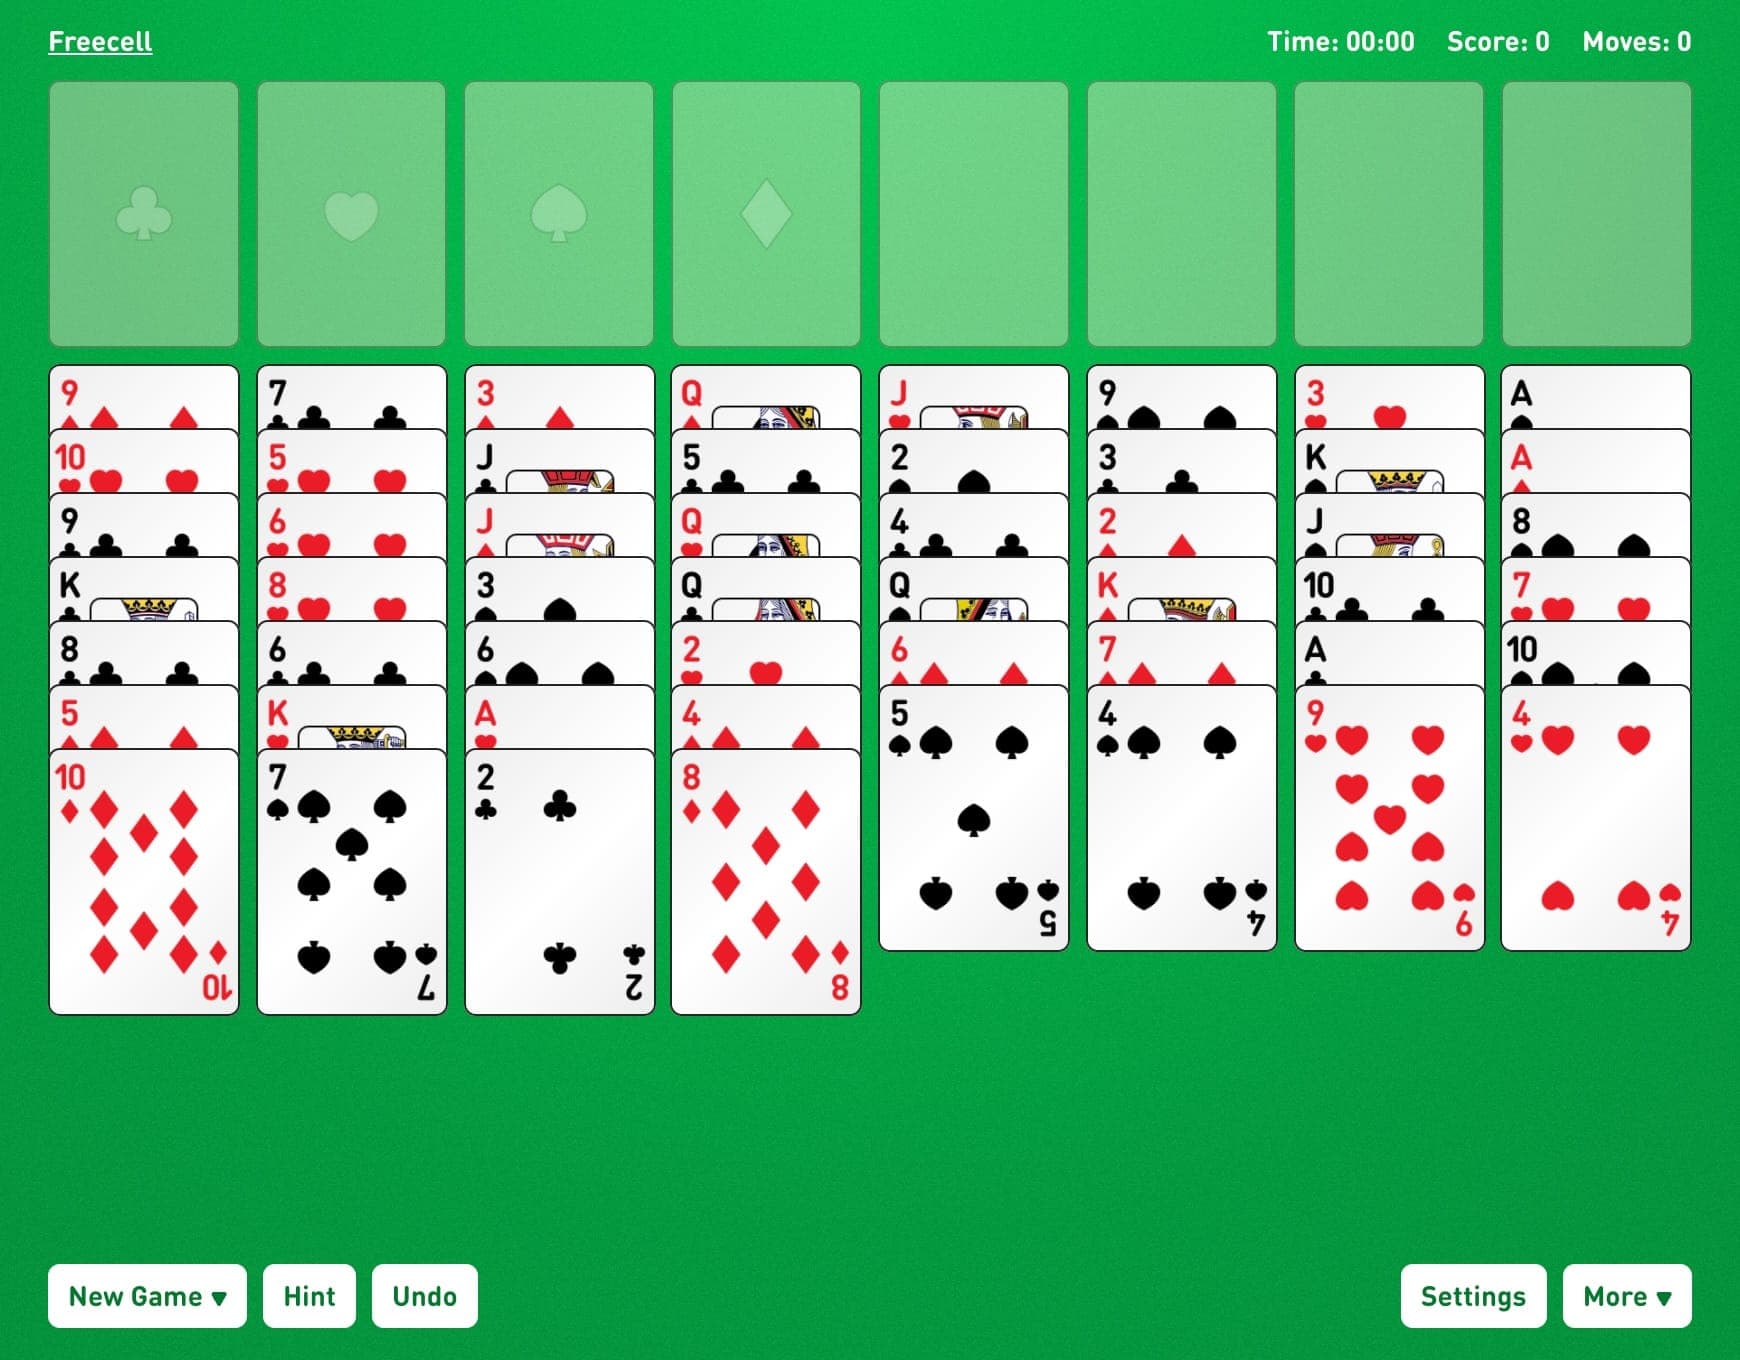 album staal agenda Solitaire - Play Solitaire Online for Free | Classic Klondike Game